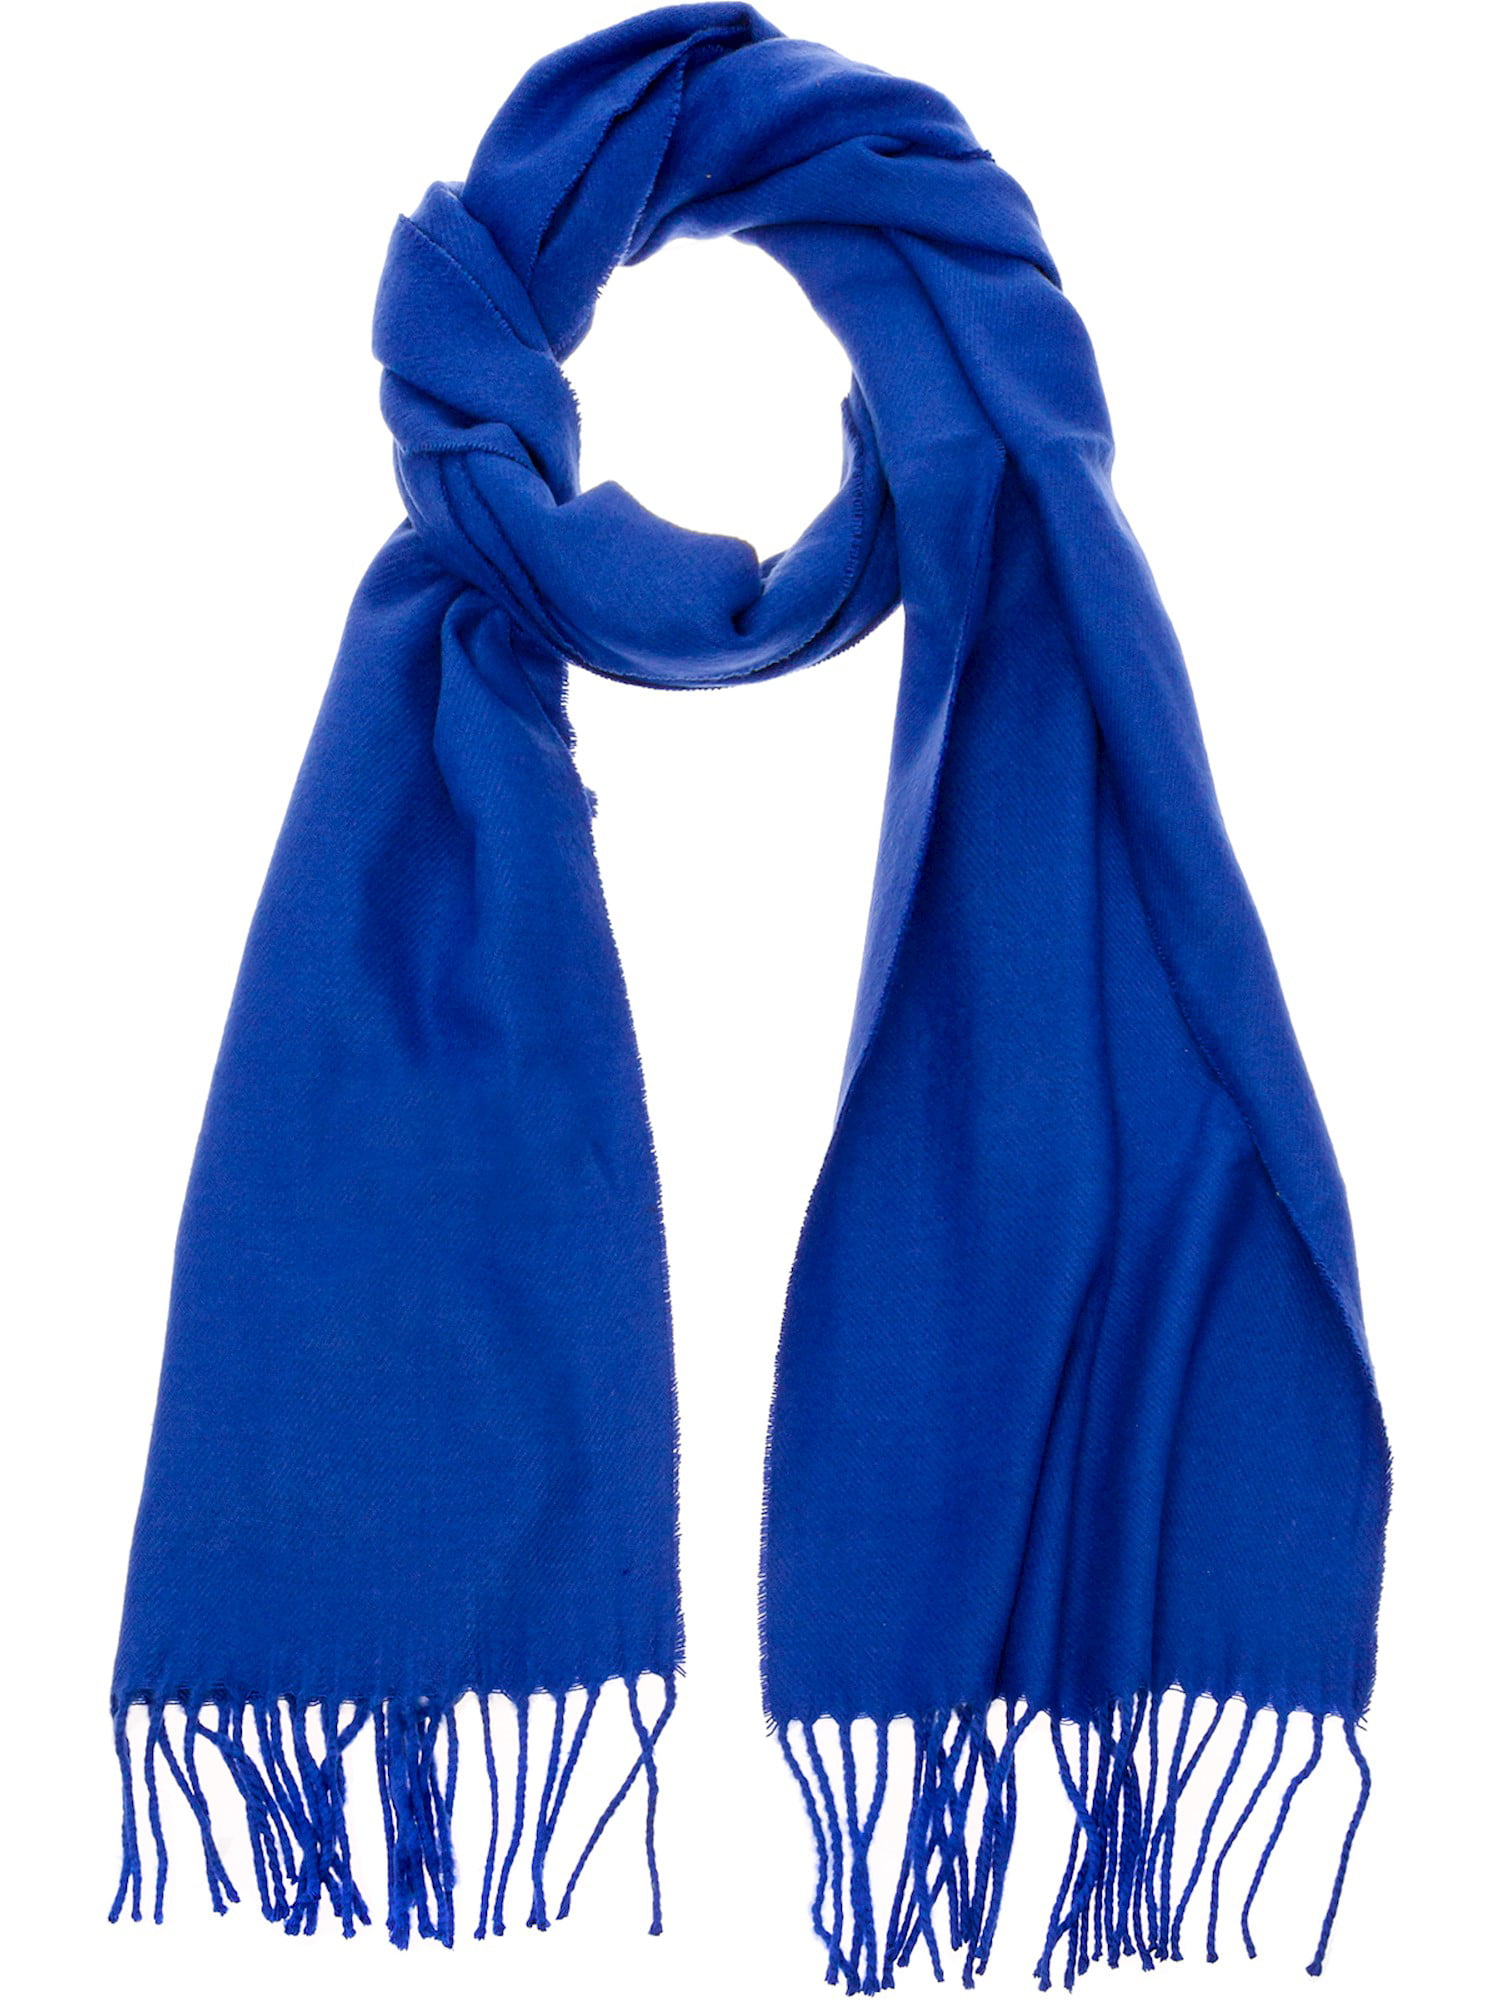 Ombre wool scarf Women's scarf Wool wrap Blue scarf for woman Blue shawl Winter accessory Long soft scarf